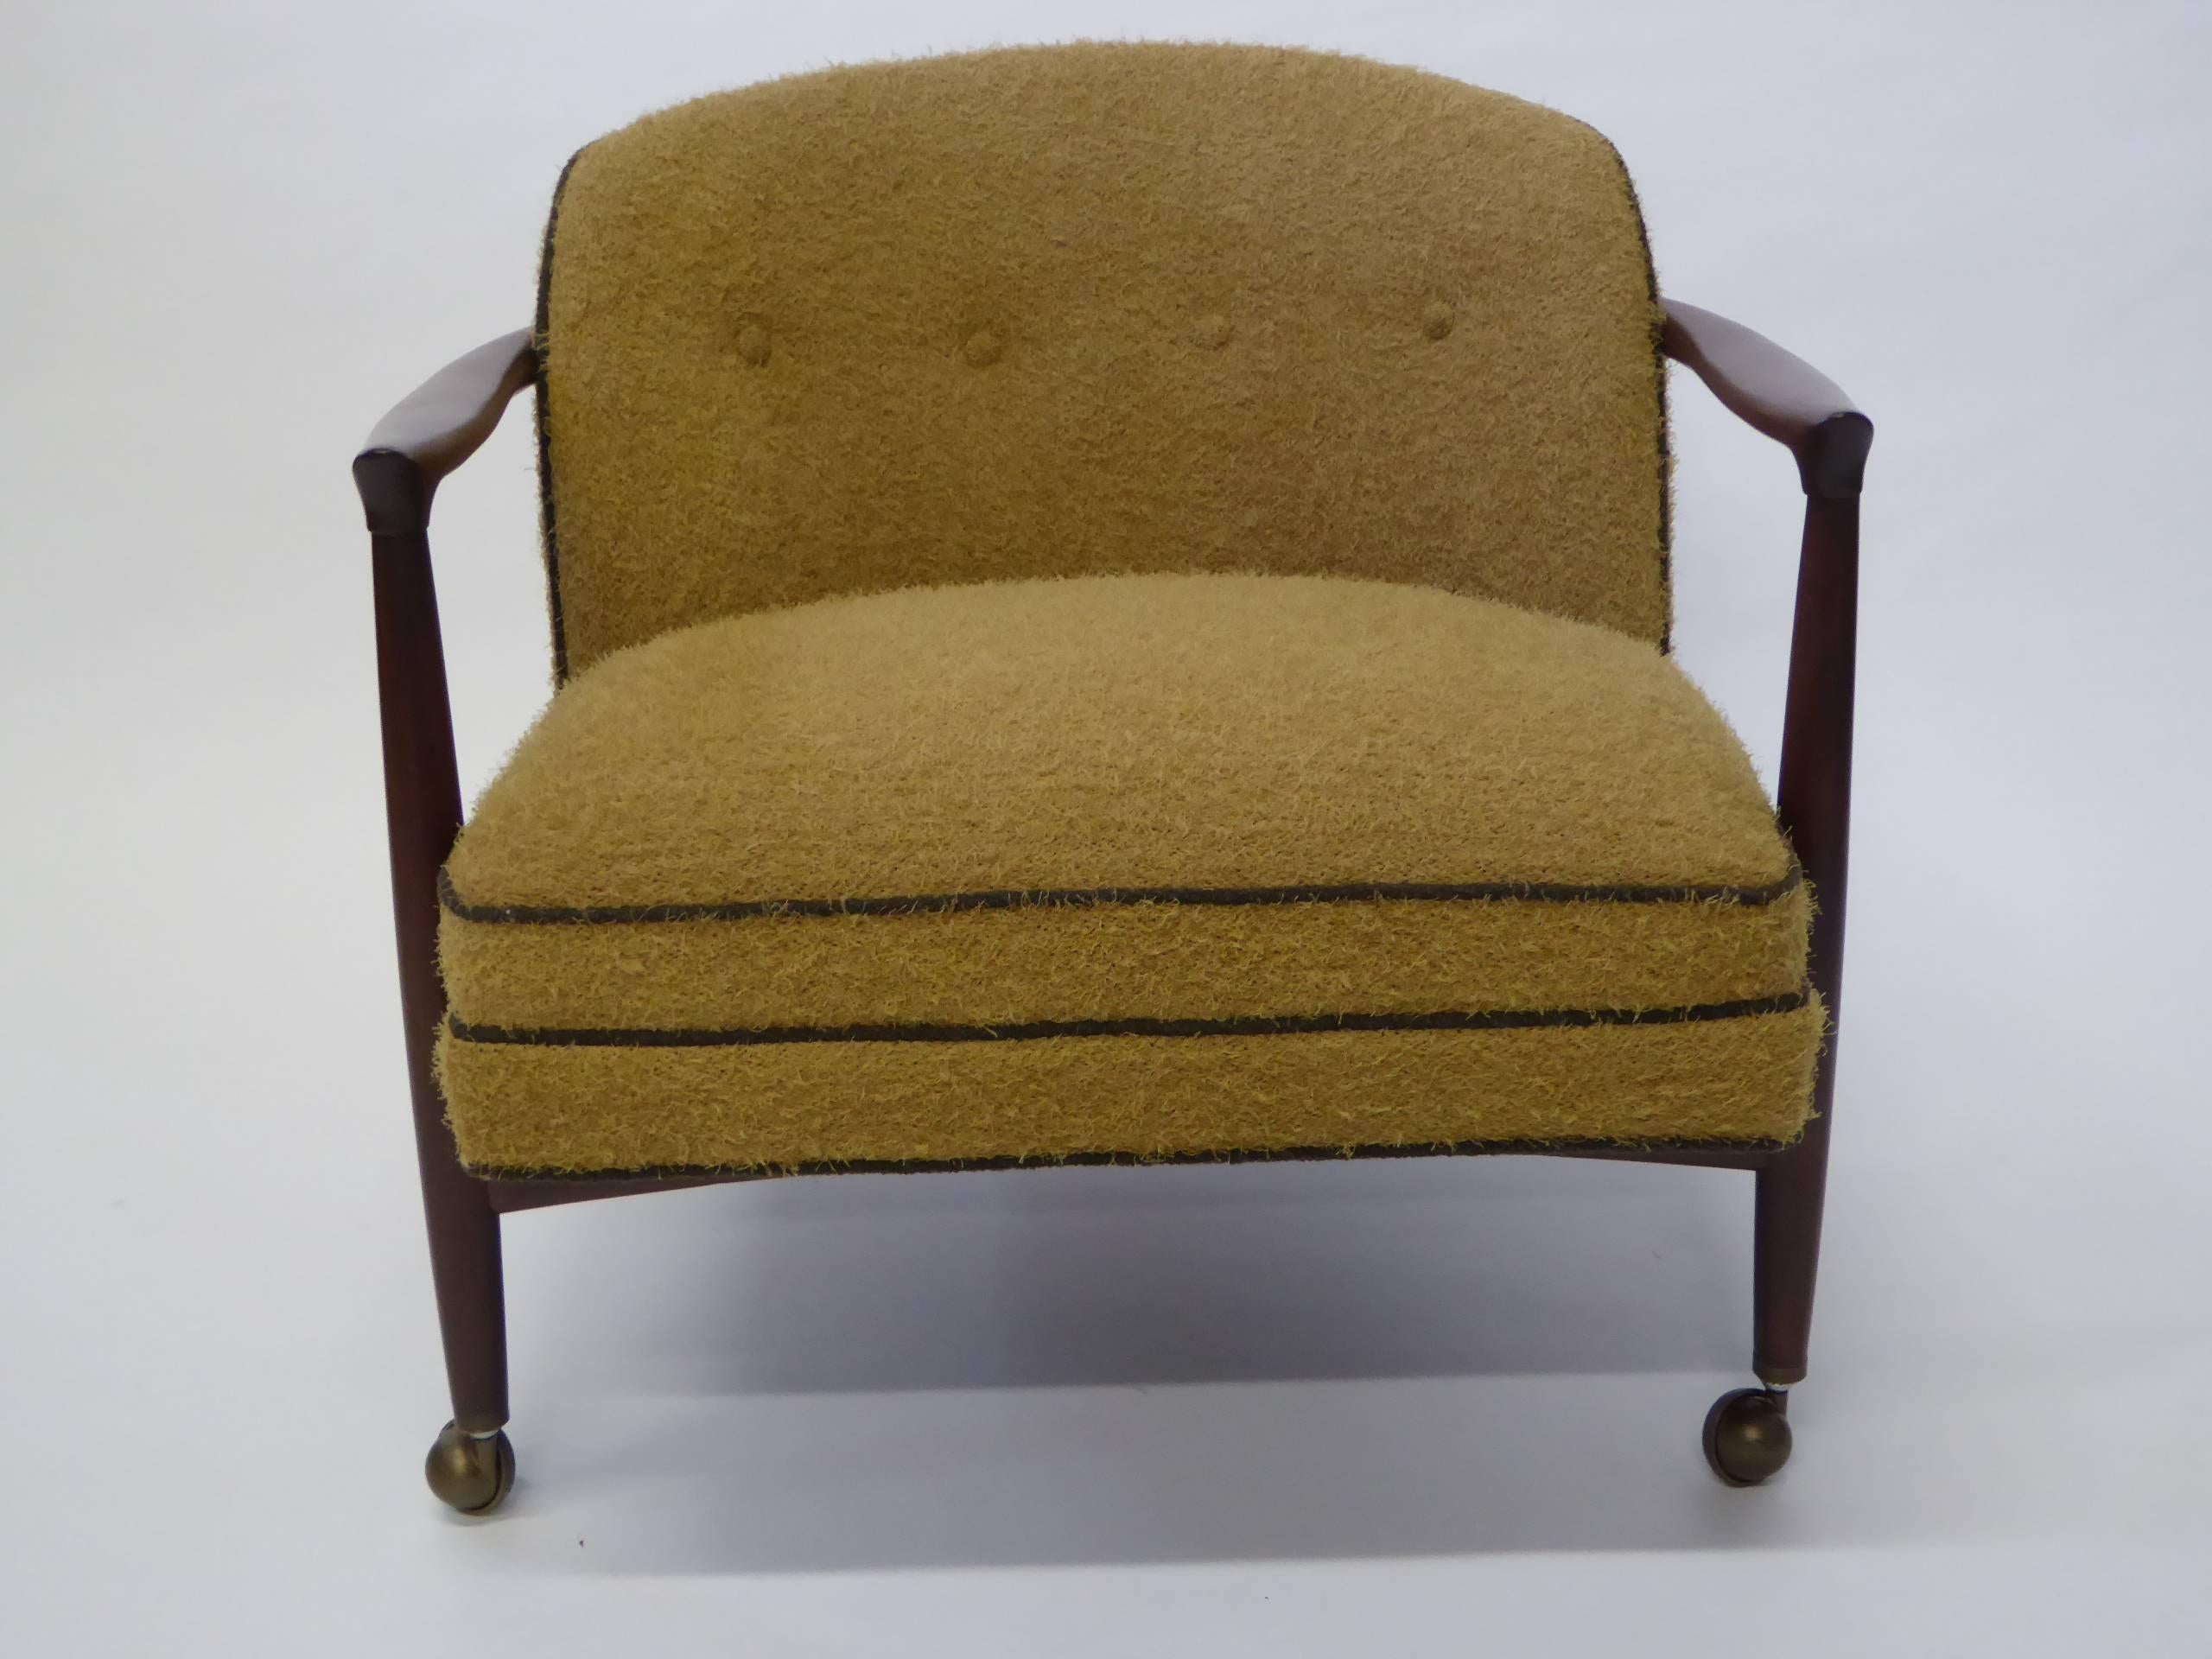 SOLD  With its beautifully sculpted and joined walnut frame this armchair by Ib Kofod-Larsen and produced in Denmark by France & Son is quite elegant and stately. Pure Danish modern, its floating rounded tufted back upholstered seat sports a nappy